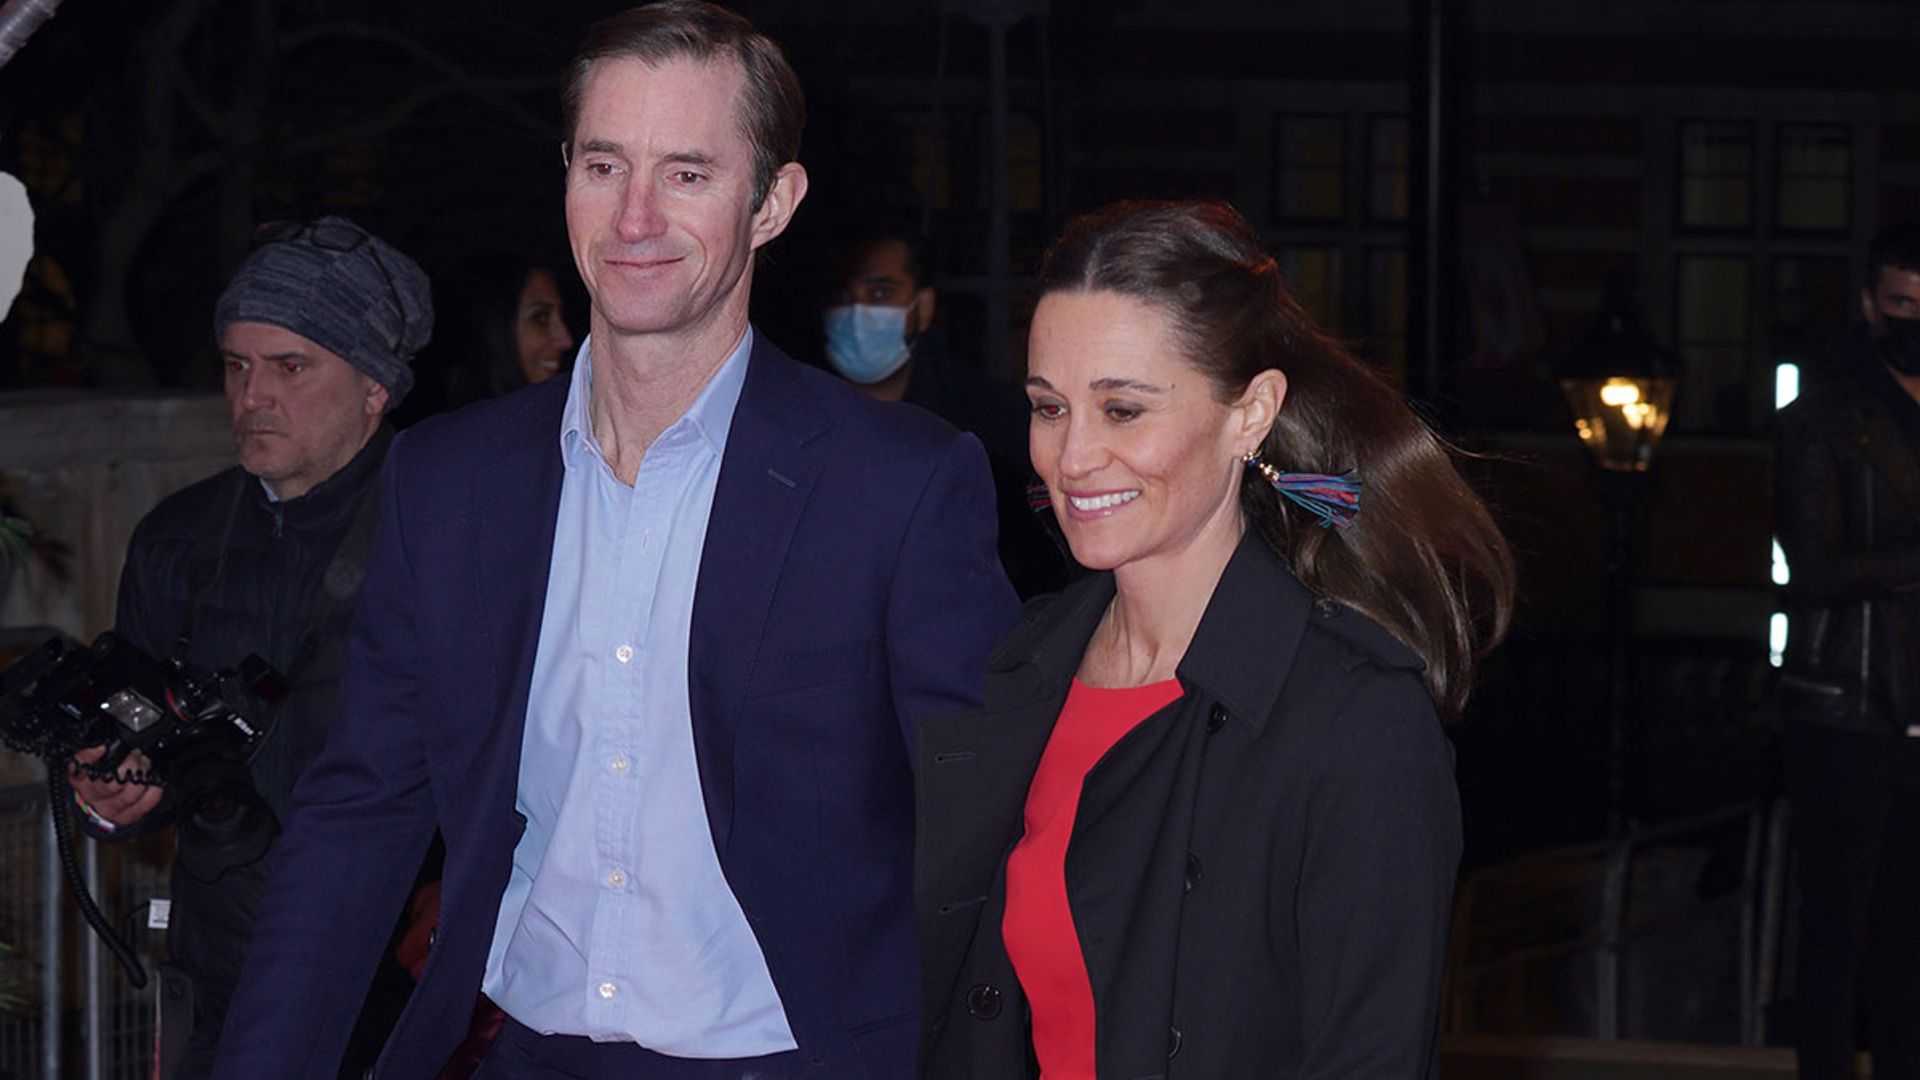 Pippa Middleton is stunning in all-red look during rare date night with husband James Matthews